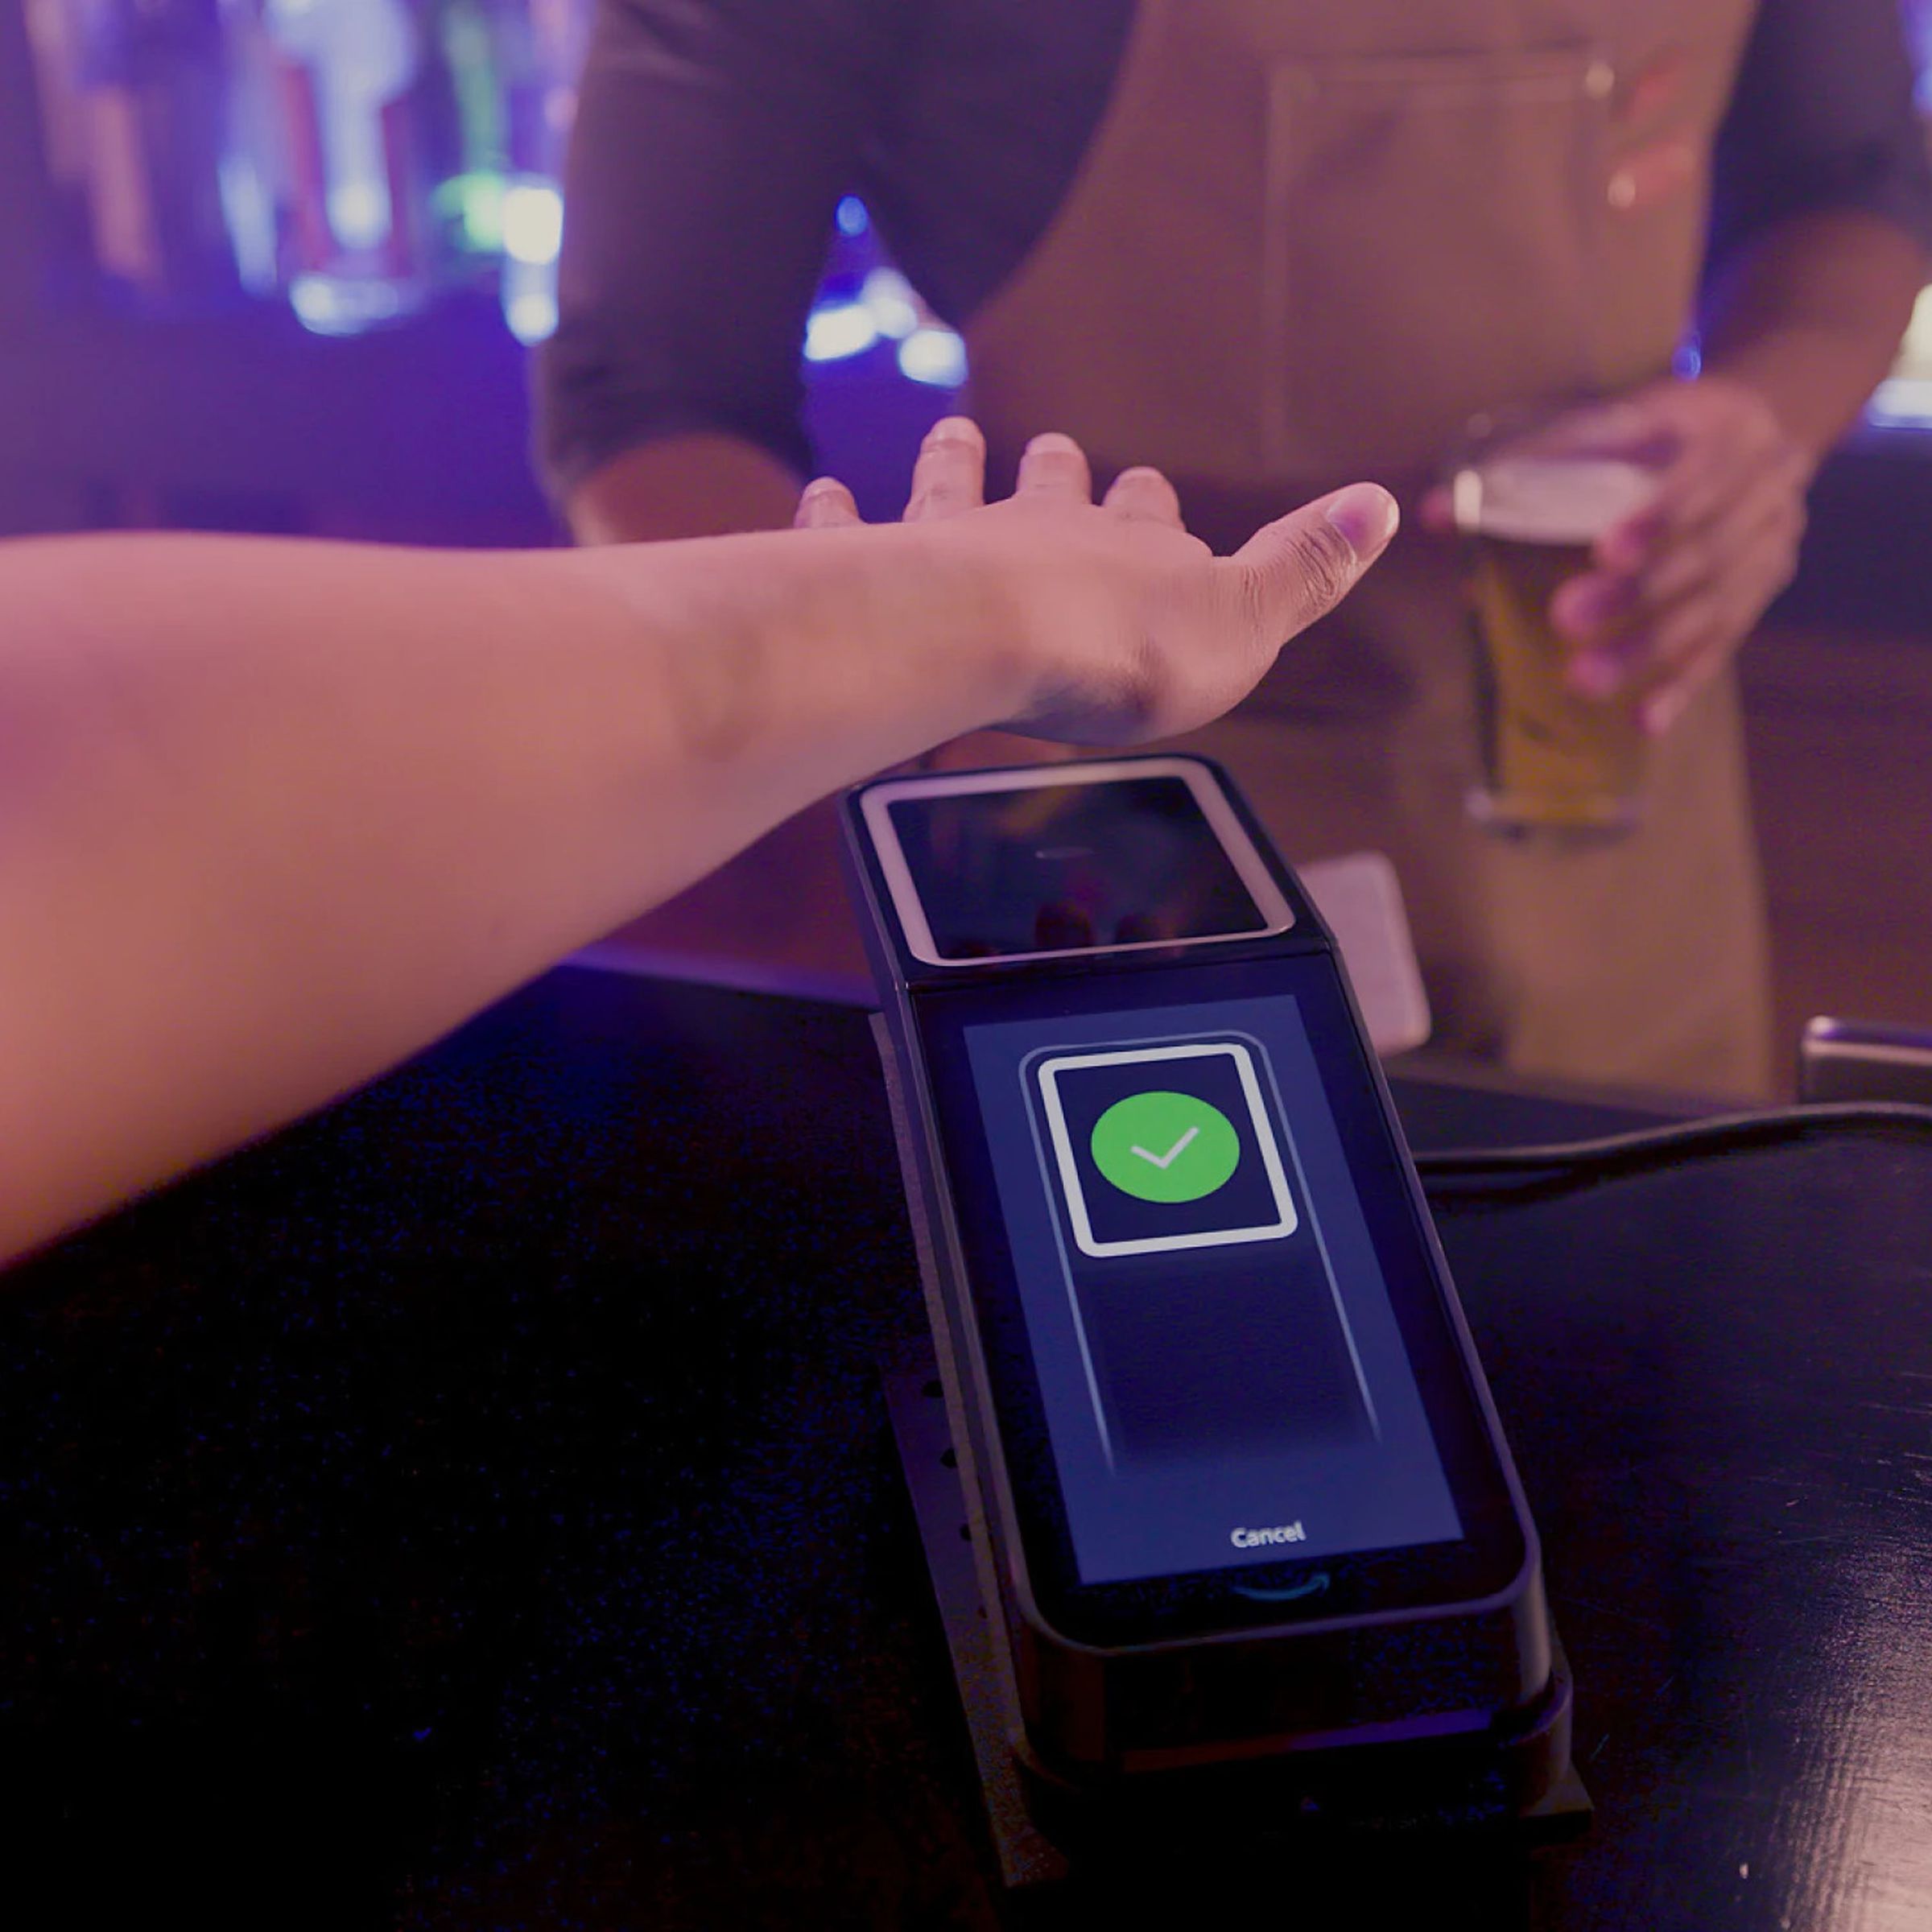 An image showing someone hovering their palm over a scanner at a bar